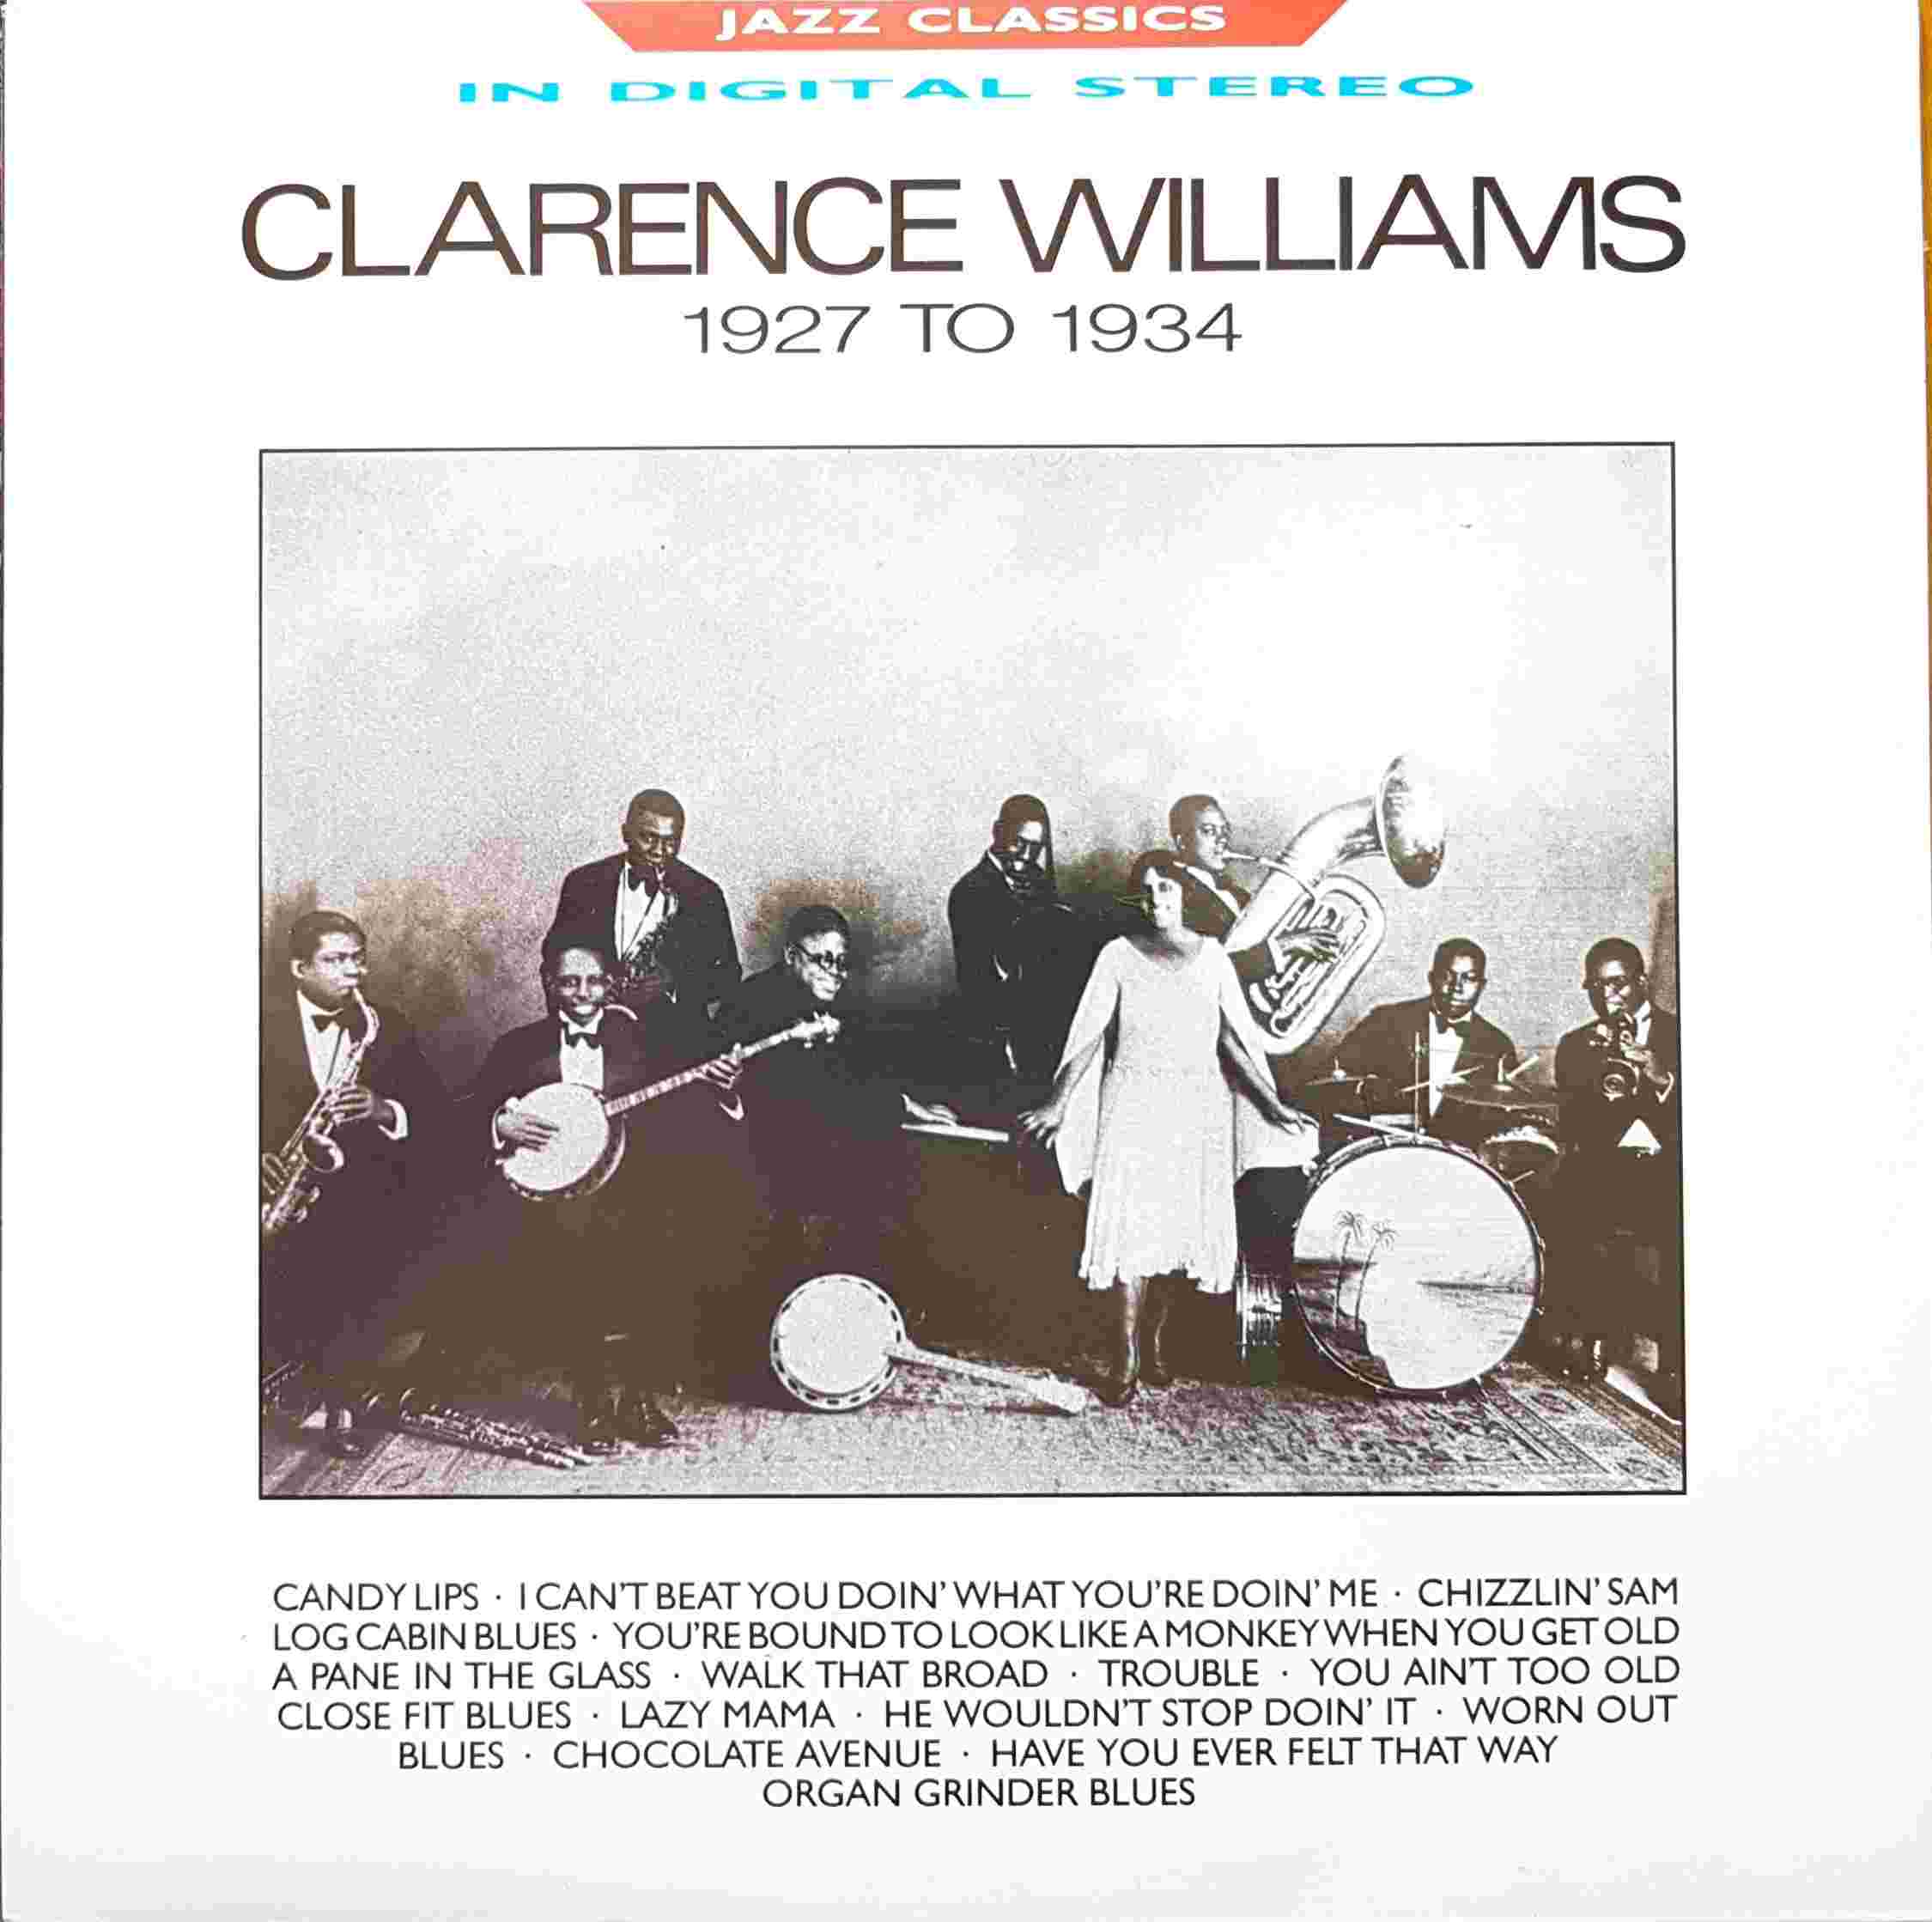 Picture of REB 721 Jazz classics - Clarence Williams 1927 - 1934 by artist Clarence Williams  from the BBC albums - Records and Tapes library